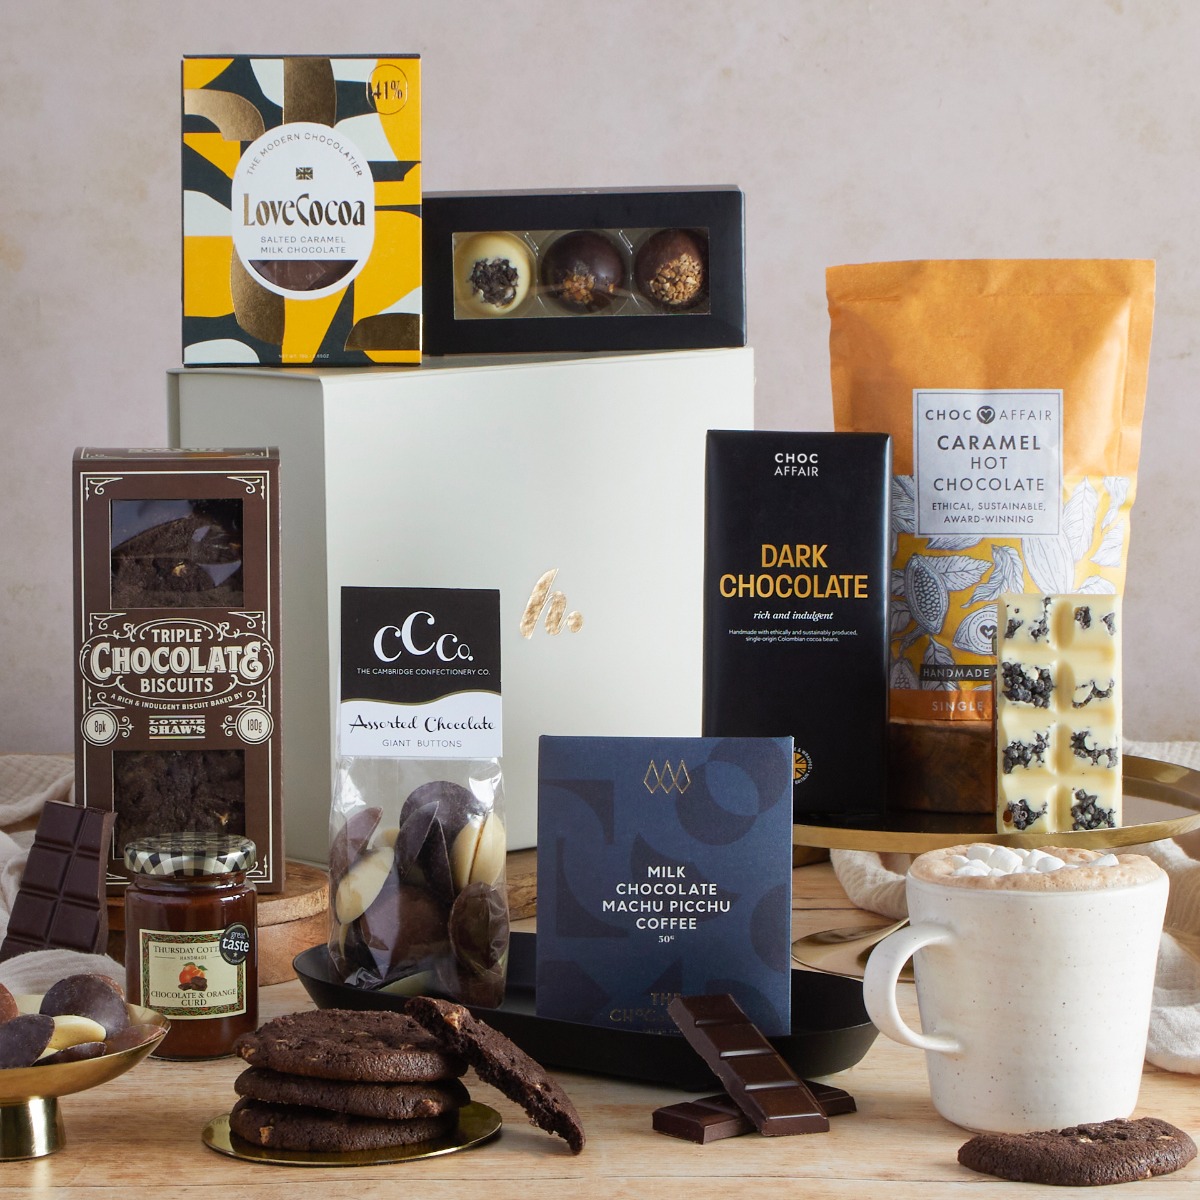 Chocolate Indulgence Hamper with contents on display, including two Choc Affair products